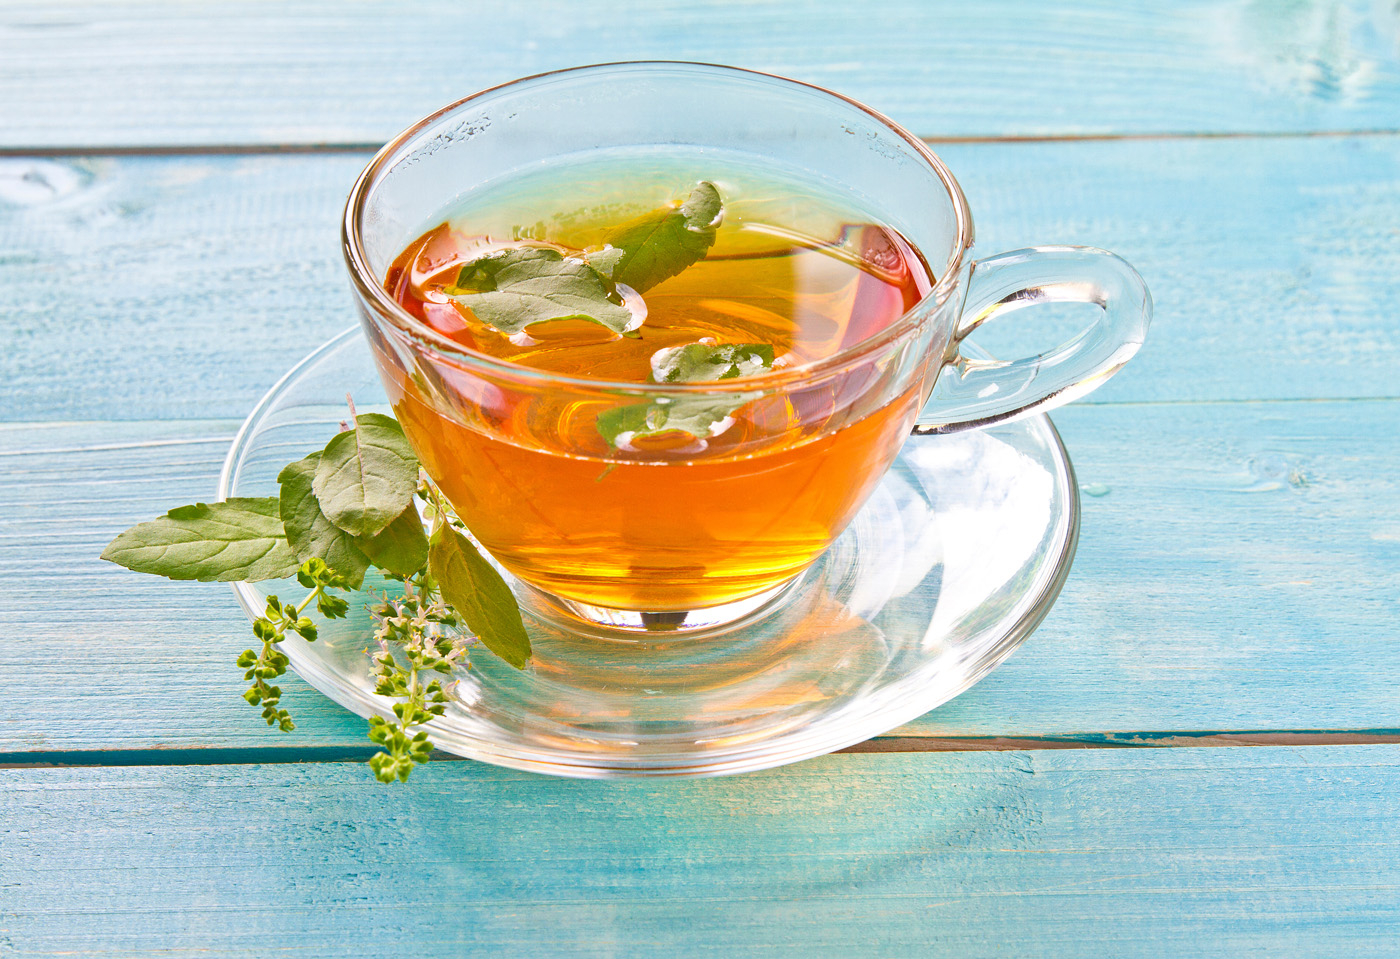 Basil tulsi tea served in a glass cup with tulsi or holi basil leaves.